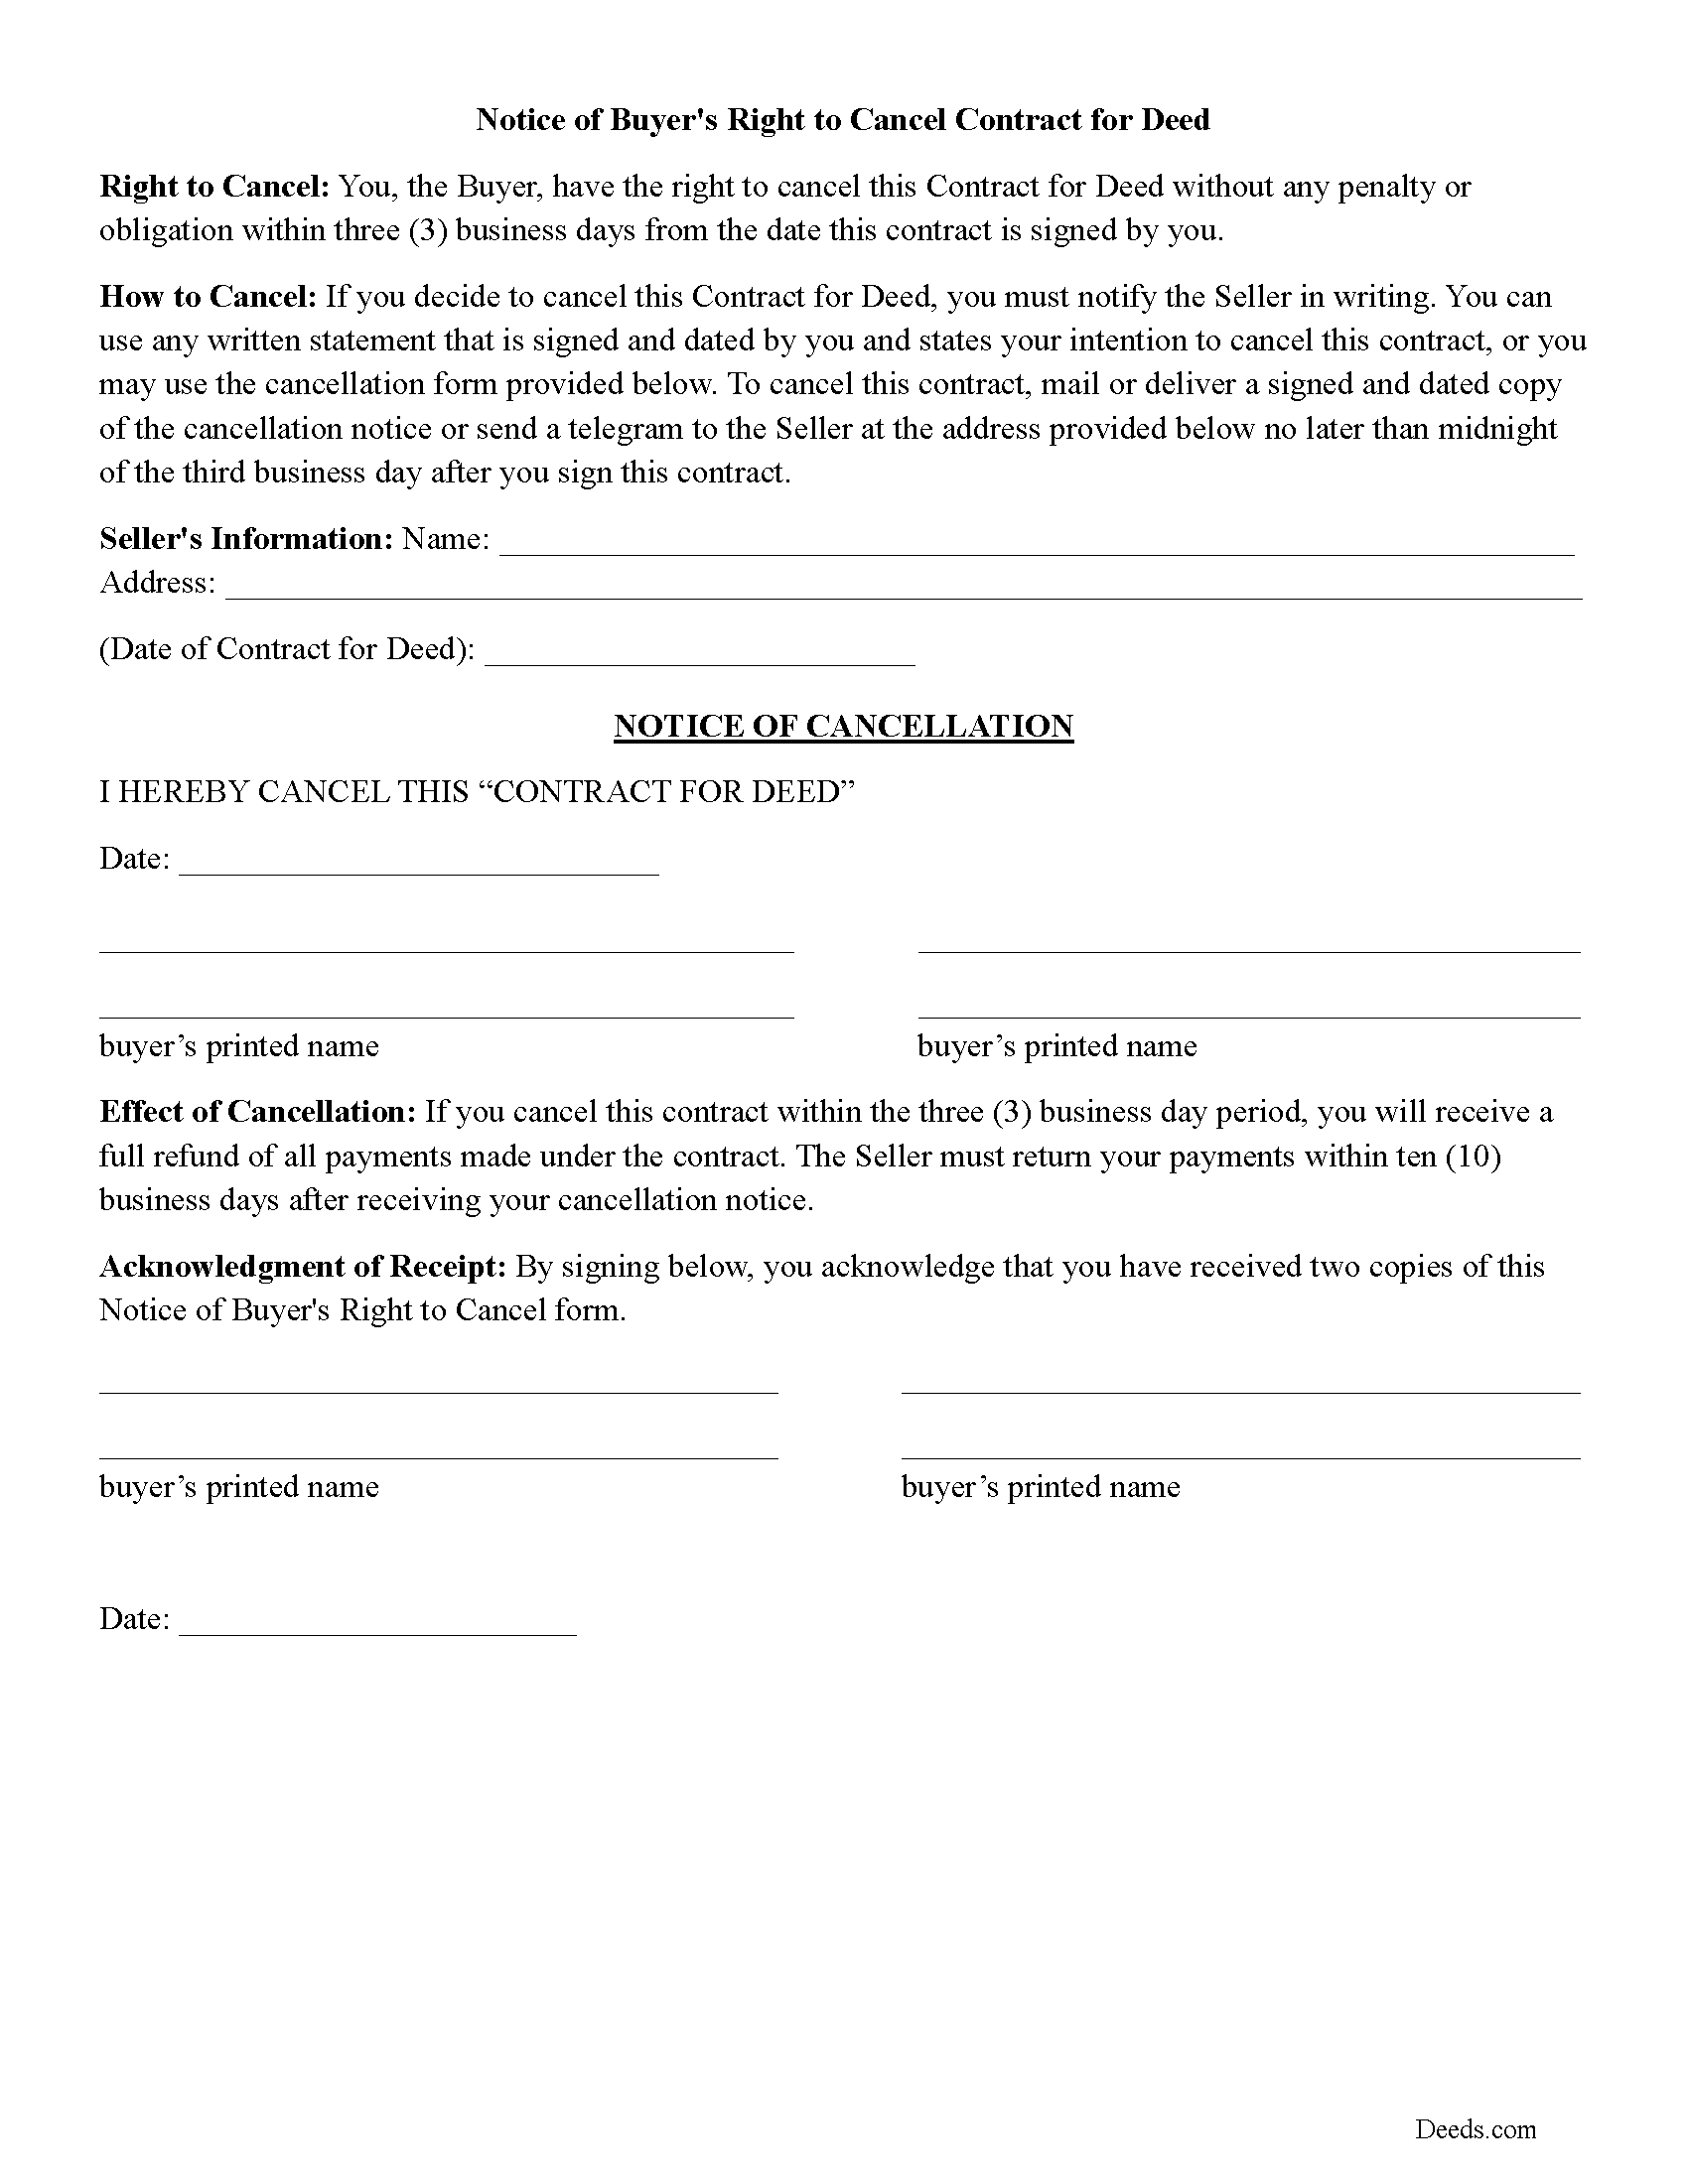 Greene County 3-day Cancellation Notice Form